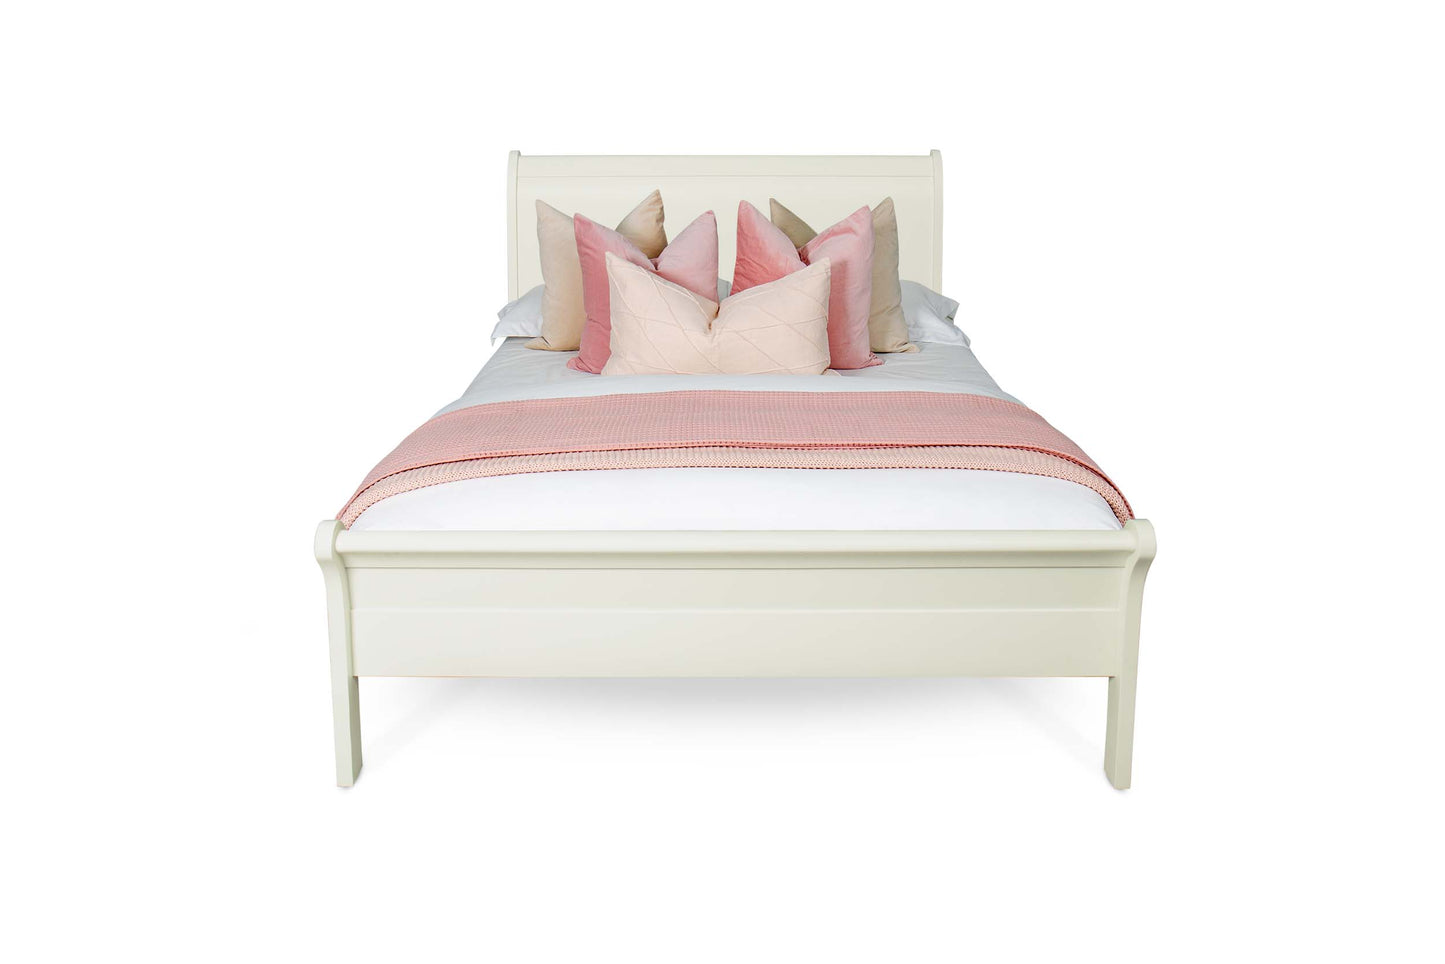 Mayfield Bed Frame - 5ft King Size - Soft White